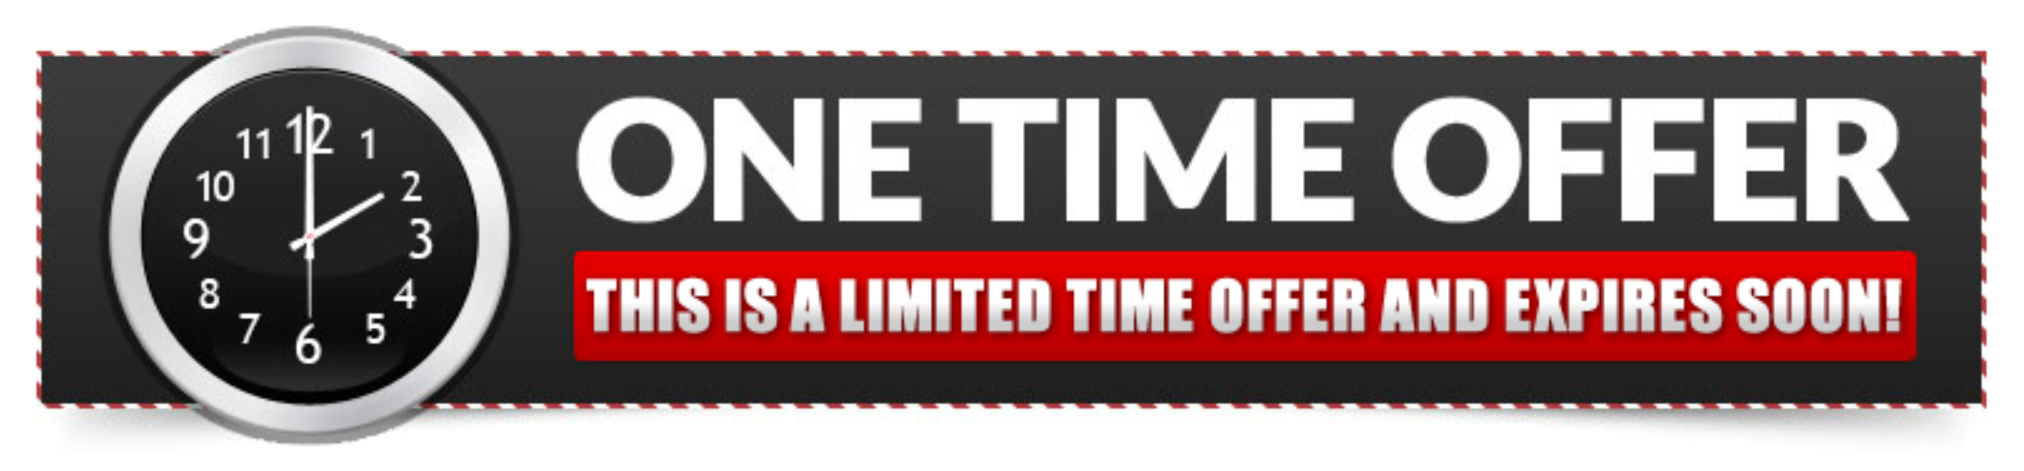 First timers. Limited time offer. Time limit offer иконка. One time offer. Limited время.